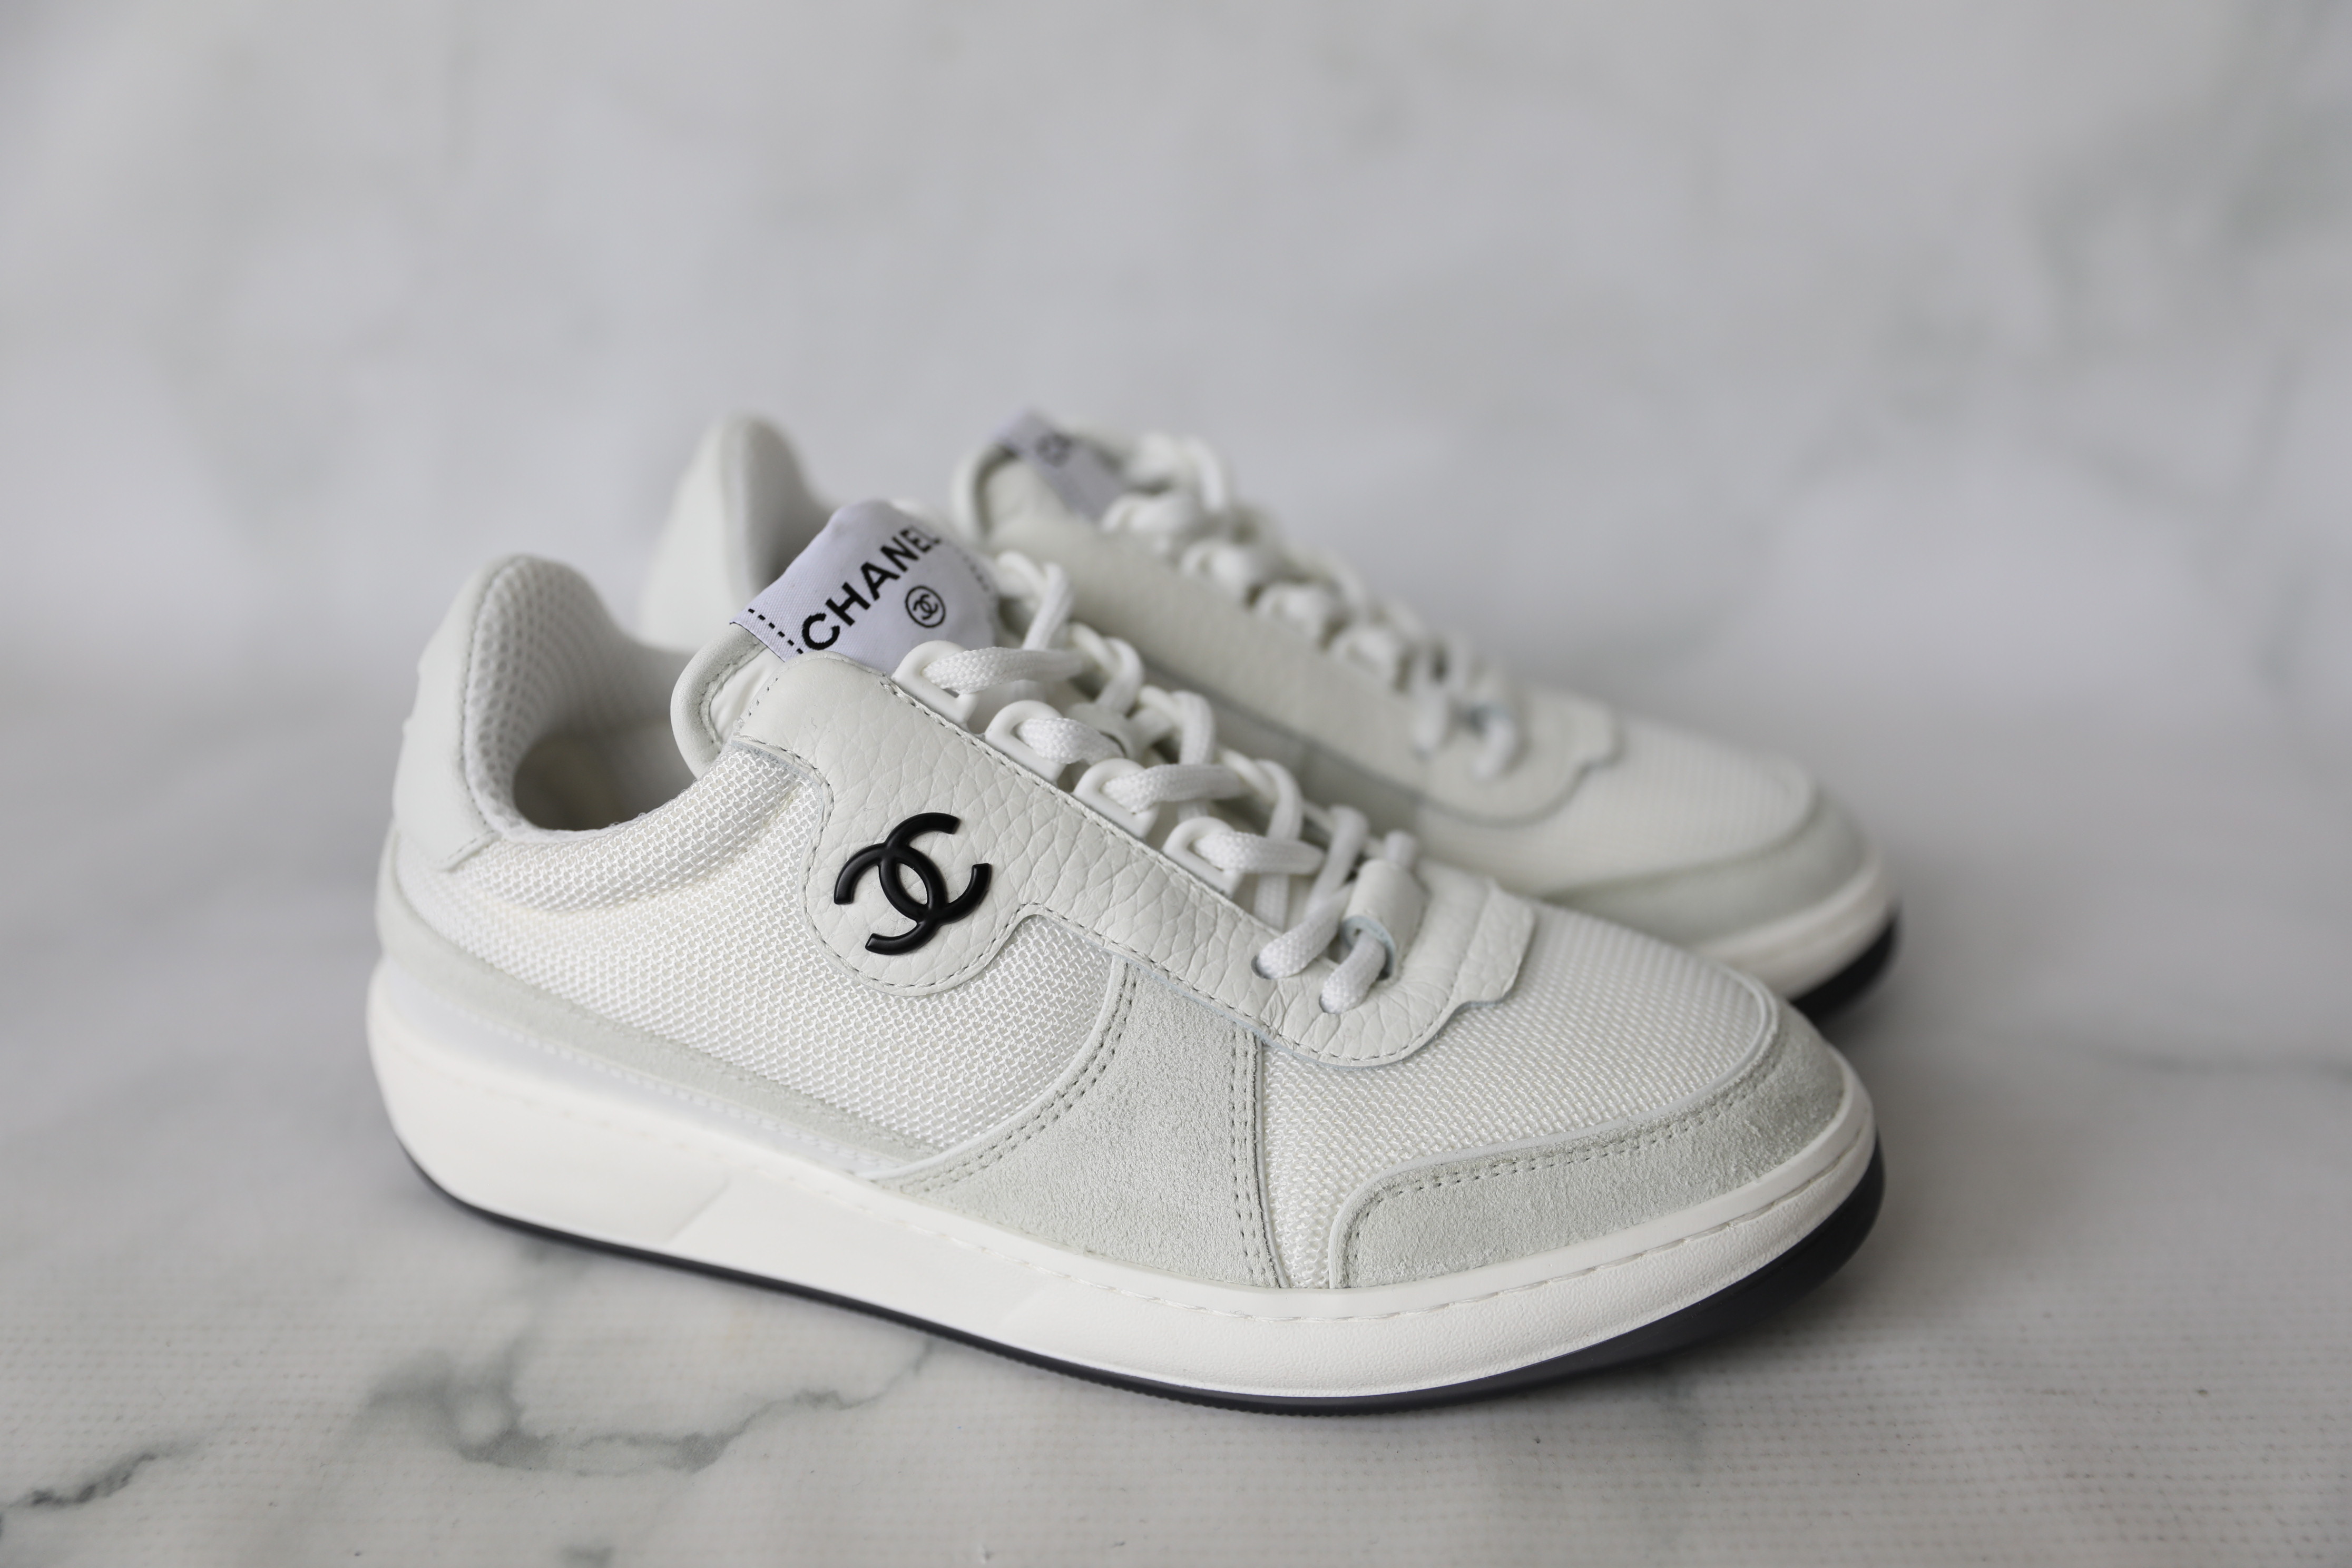 Chanel Shoes Sneakers, White, Size 36, New in Dustbag WA001